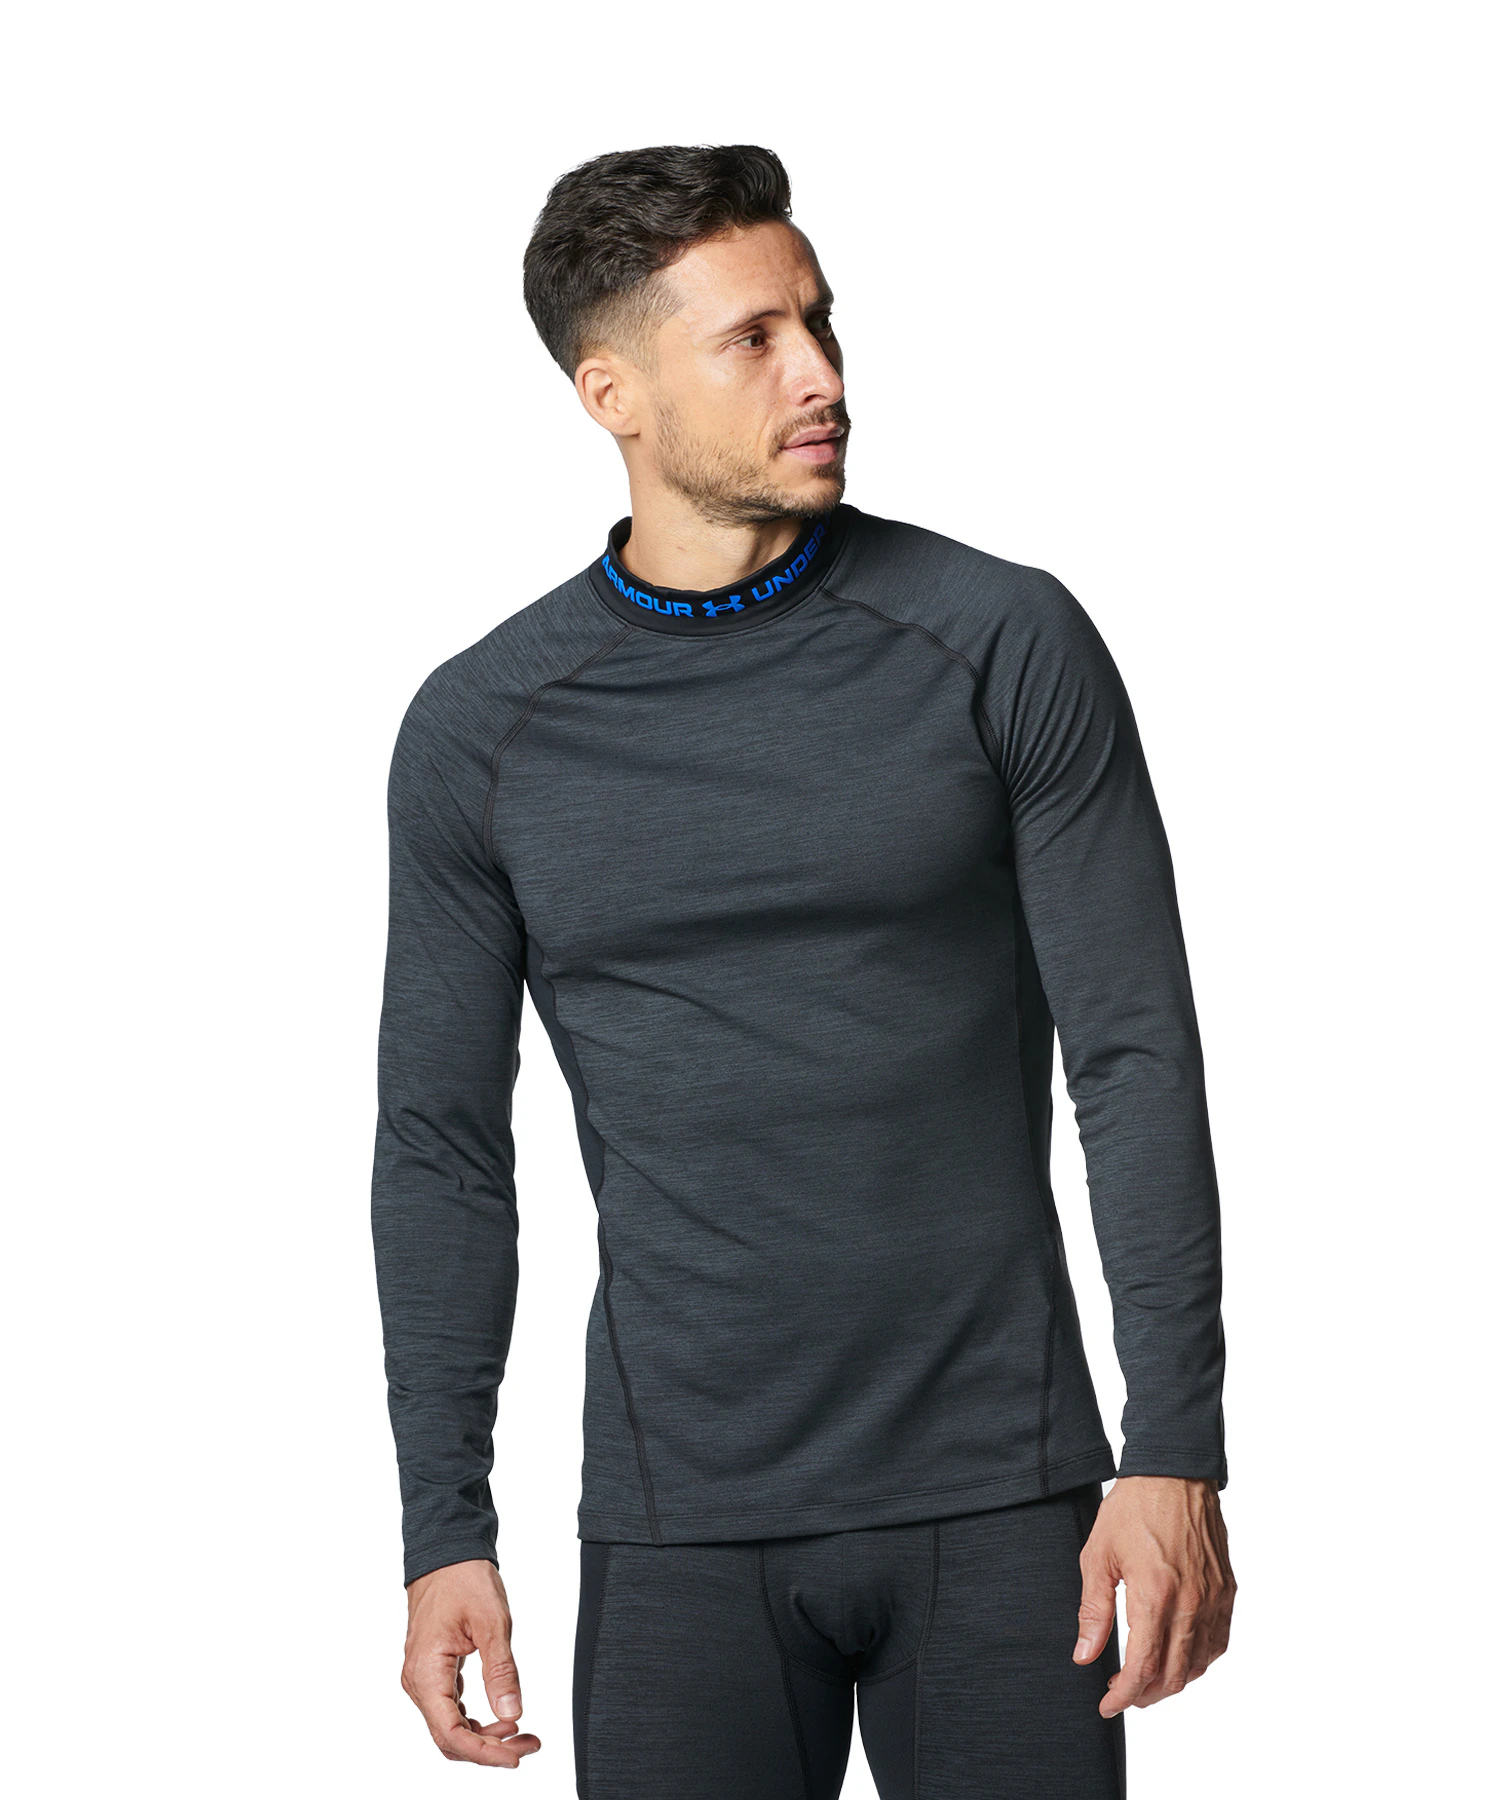 HeatGear® Armour is our original performance baselayer—the layer you put on  first and take off last. It's tight to wick away sweat and quick-drying to  keep you cool. No athlete can go